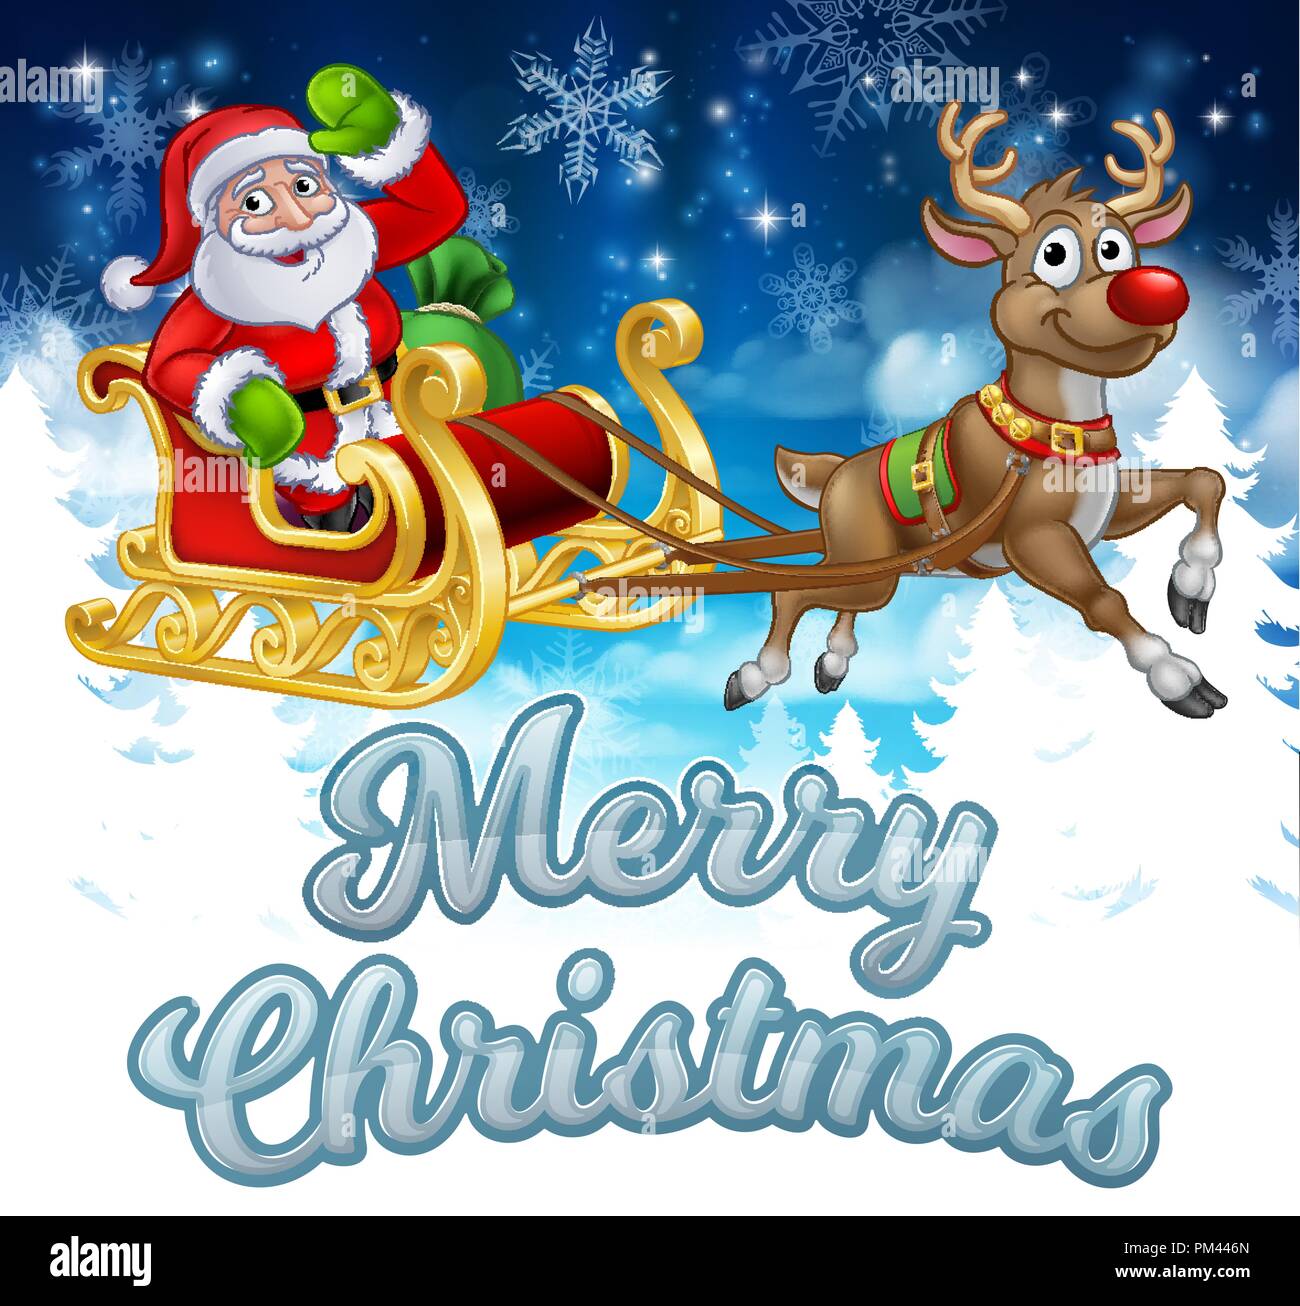 Pictures Of Merry Christmas With Santa Claus